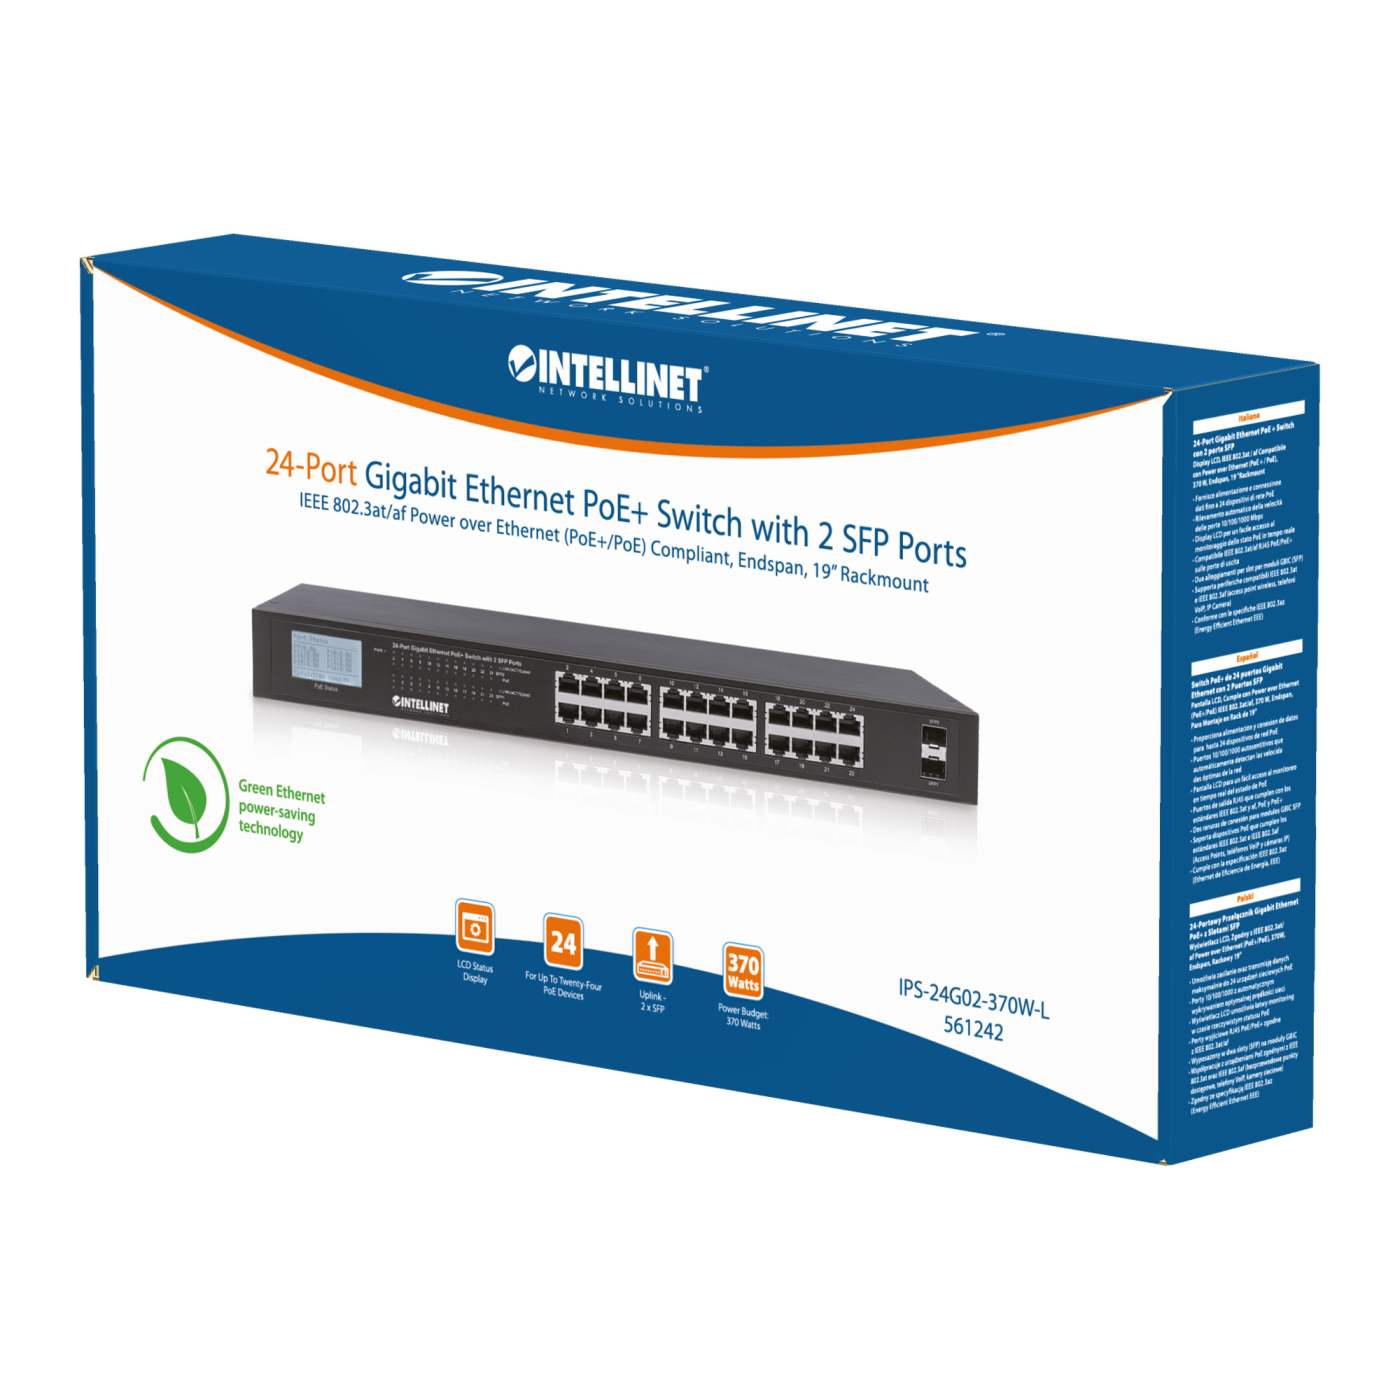 24-Port Gigabit Ethernet PoE+ Switch with 2 SFP Ports and LCD Screen Packaging Image 2